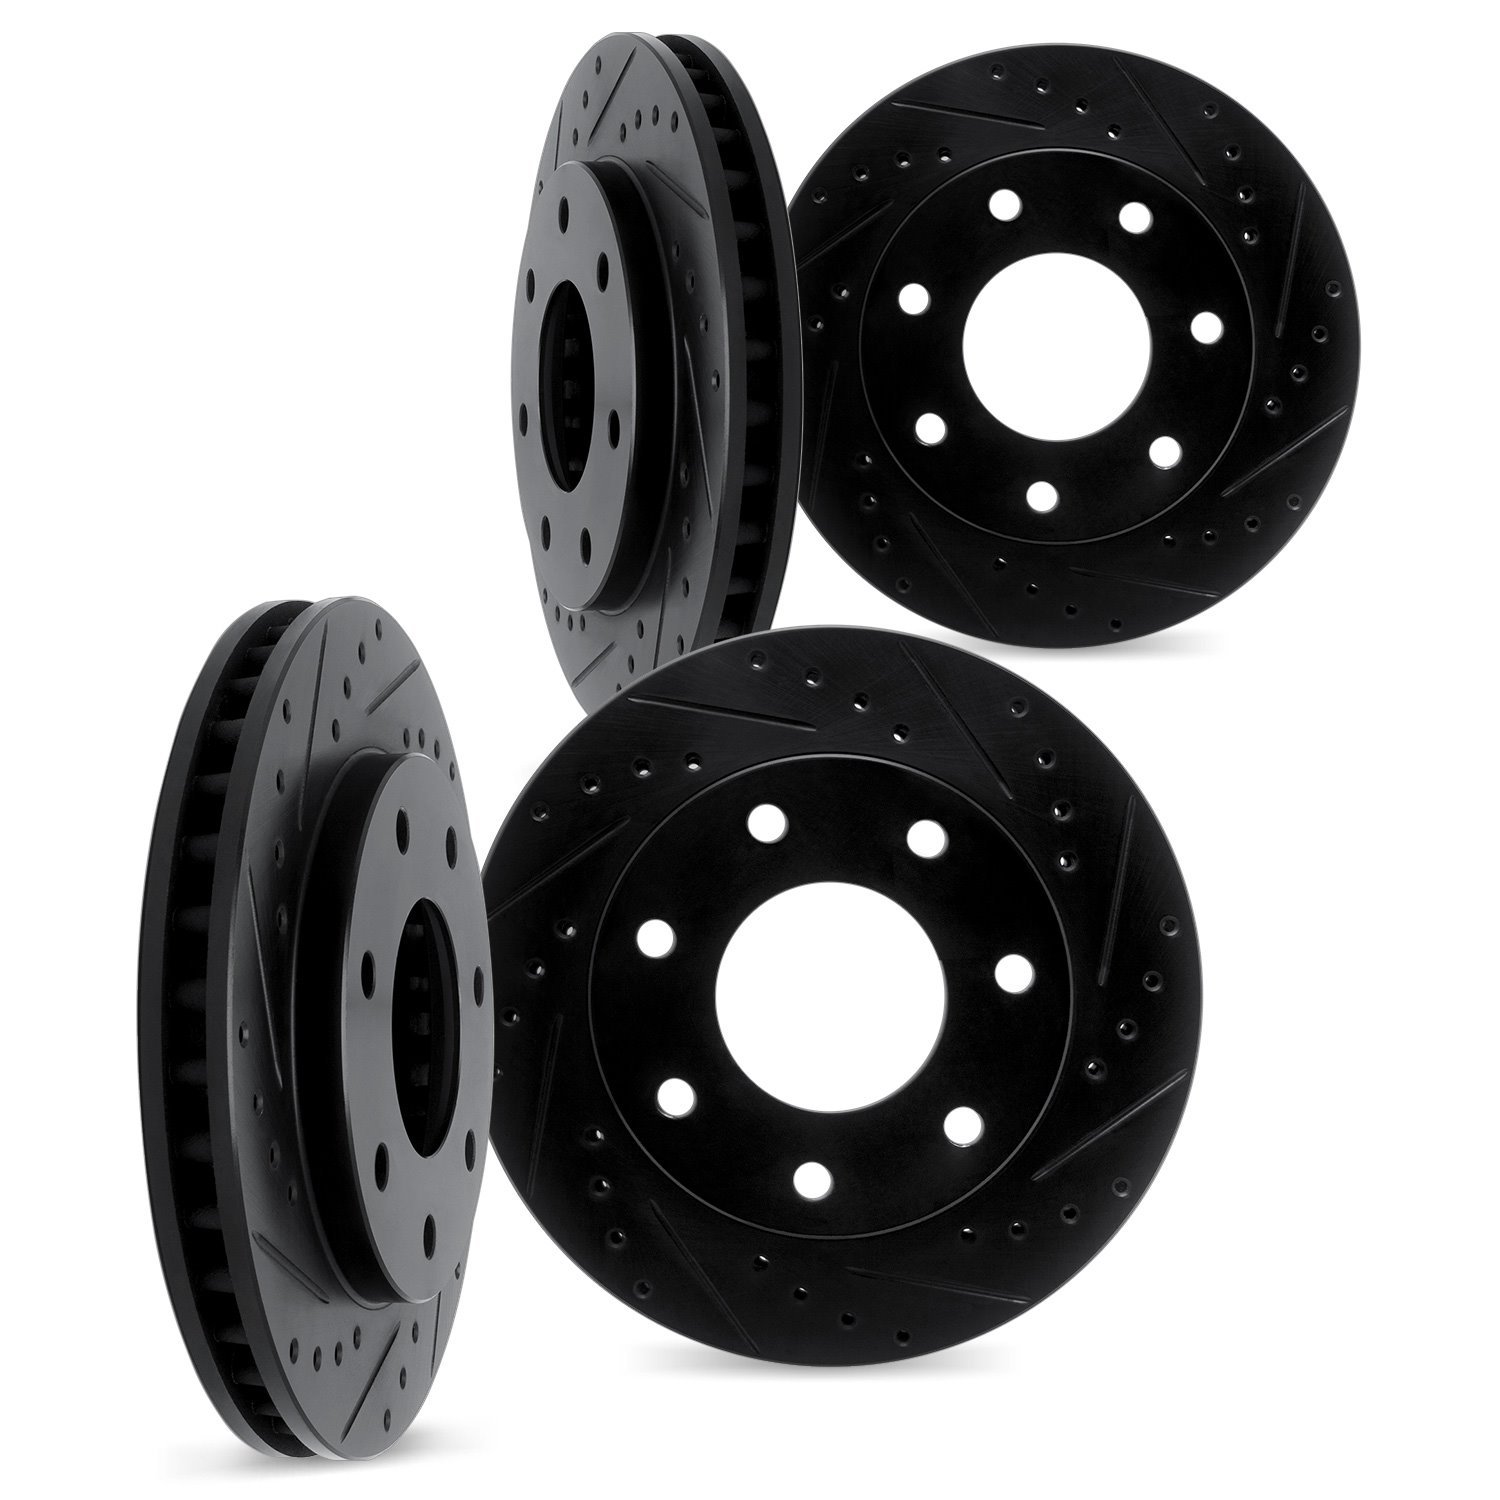 8004-54152 Drilled/Slotted Brake Rotors [Black], 2009-2009 Ford/Lincoln/Mercury/Mazda, Position: Front and Rear